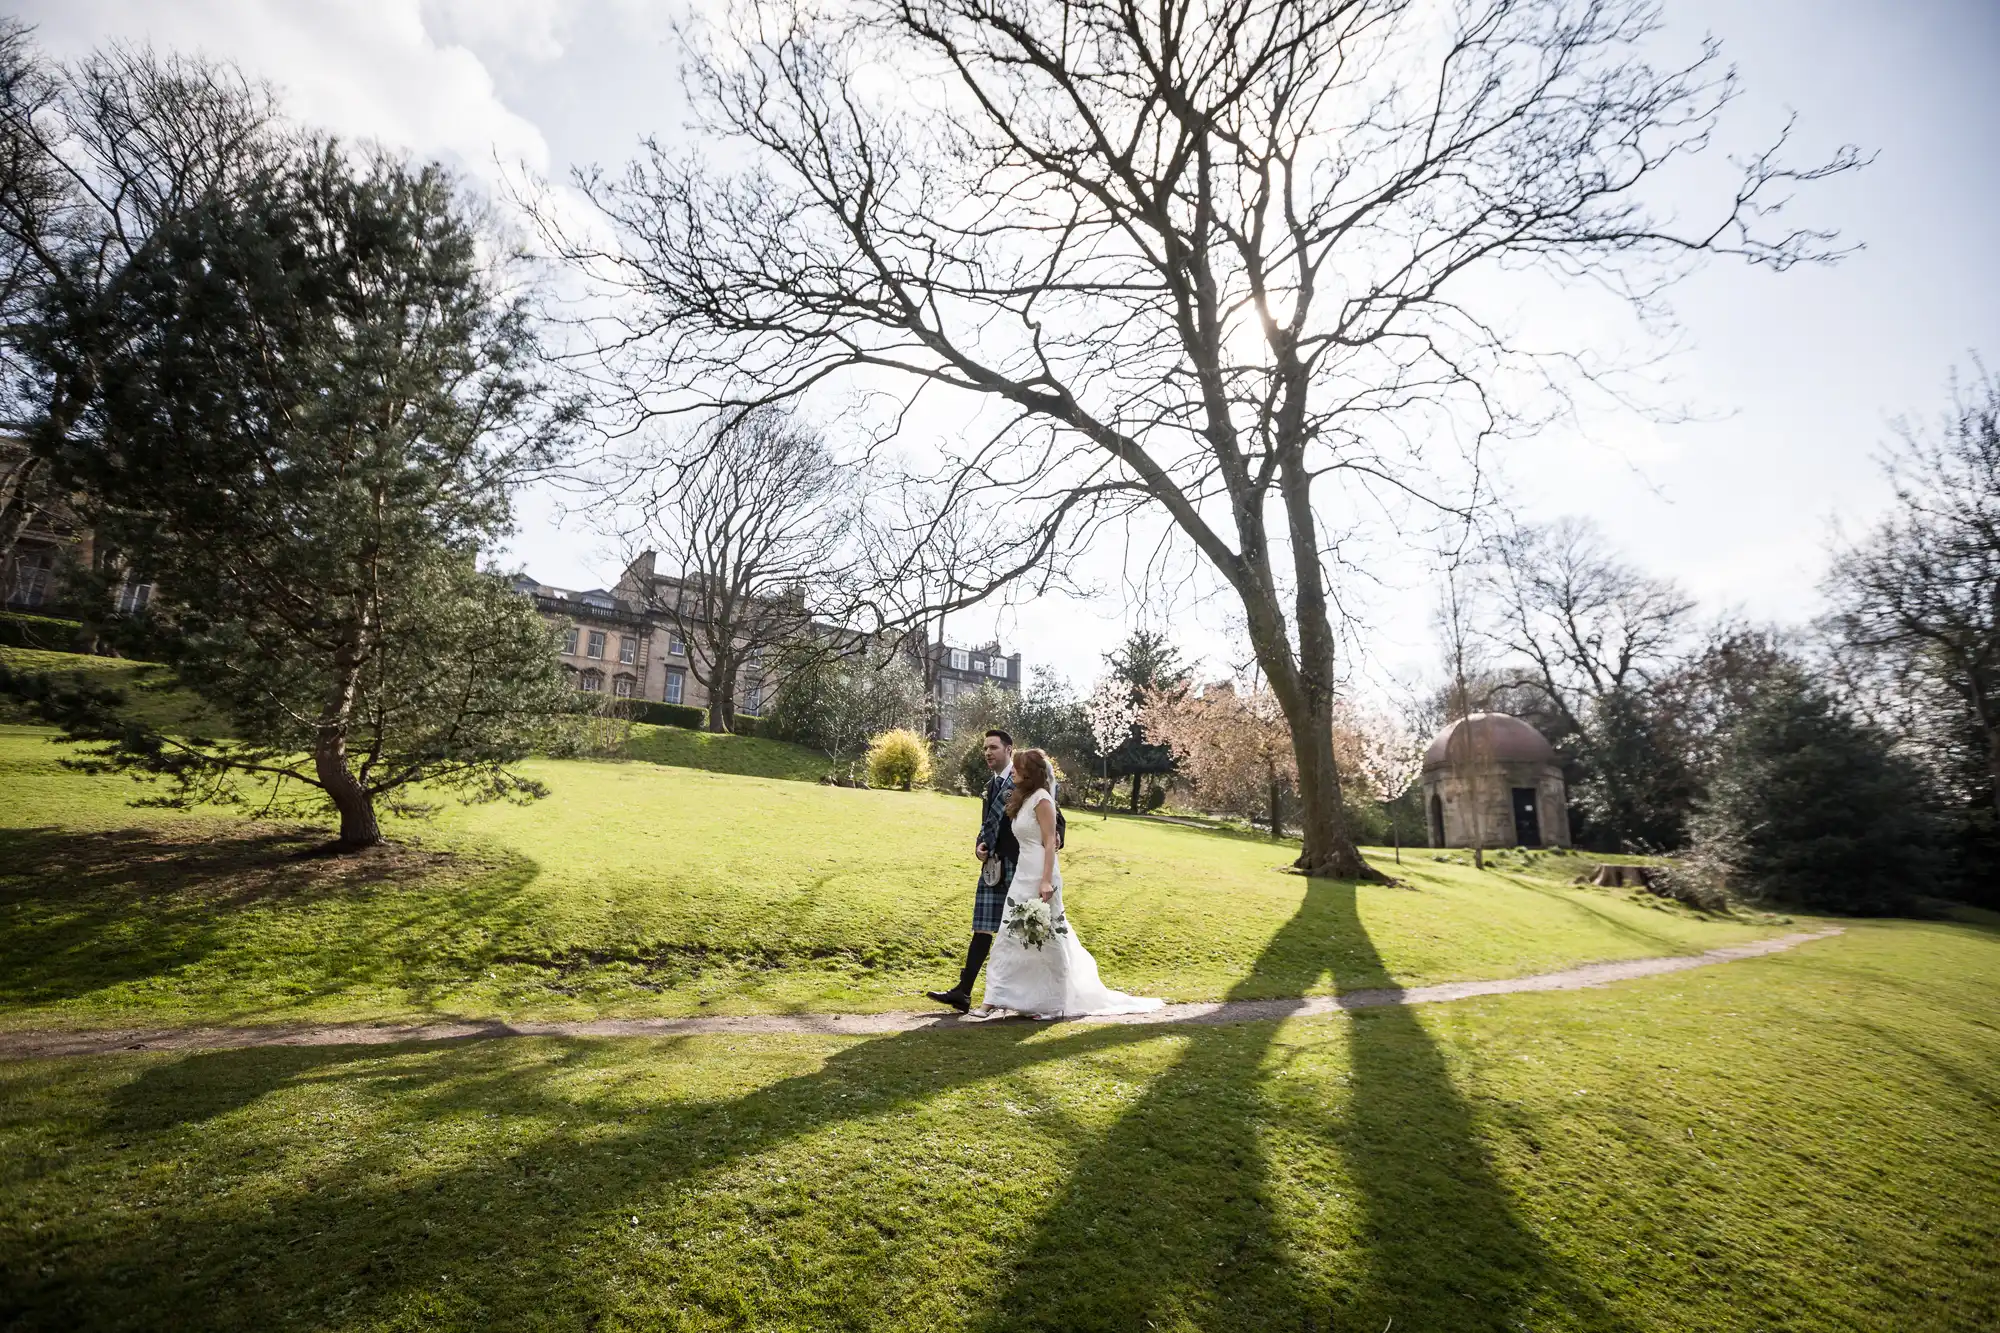 A bride and groom walk hand in hand on a narrow path through a sunlit park with trees and grass, shadows stretching across the ground, and buildings in the background.